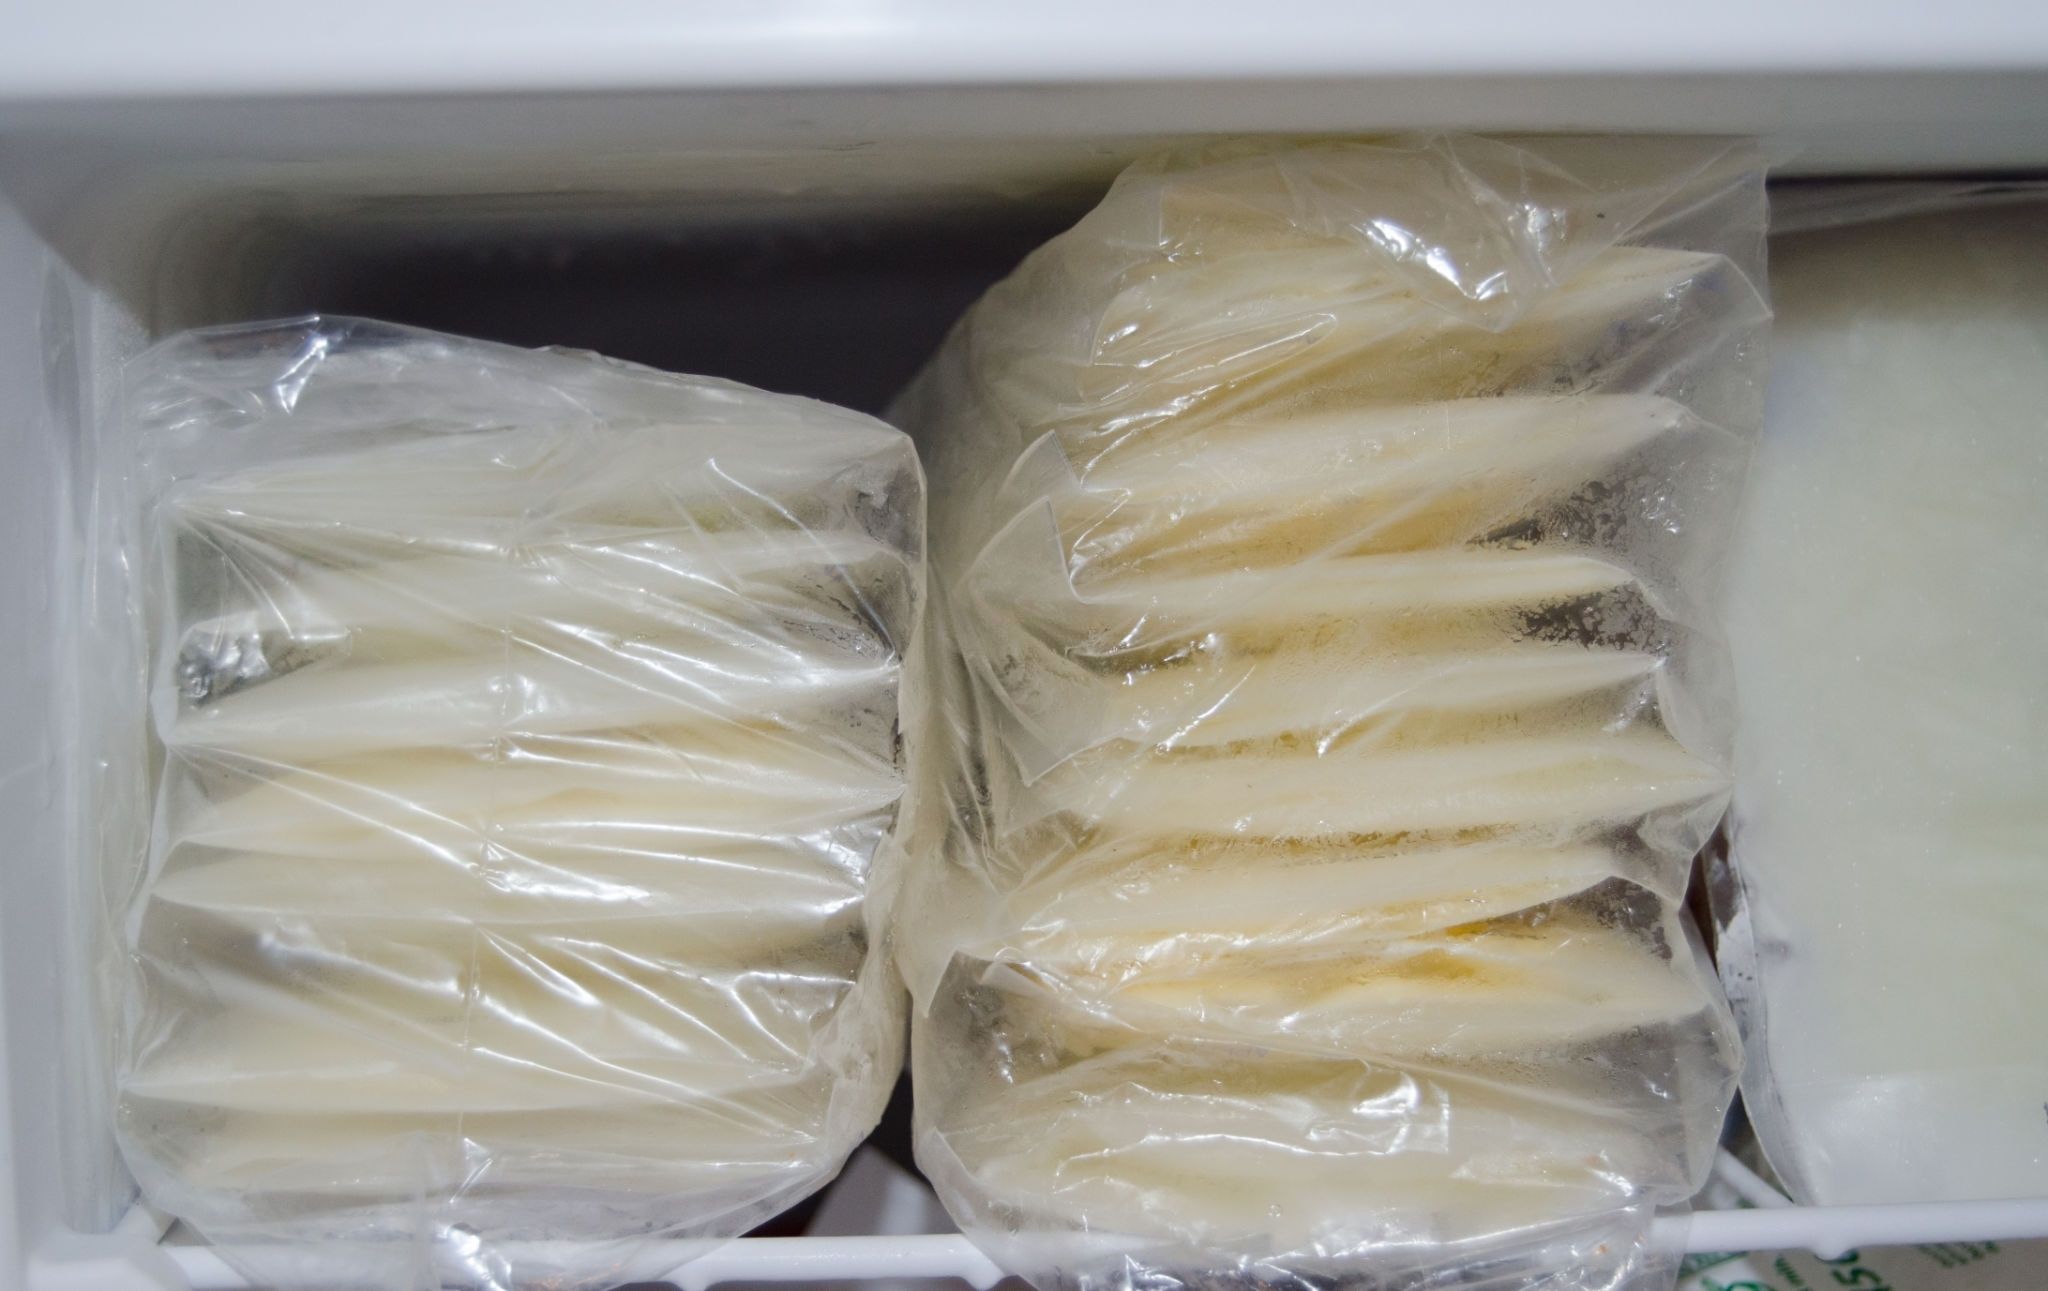 Using bottles and freezer milk bags to store the Breast Milk